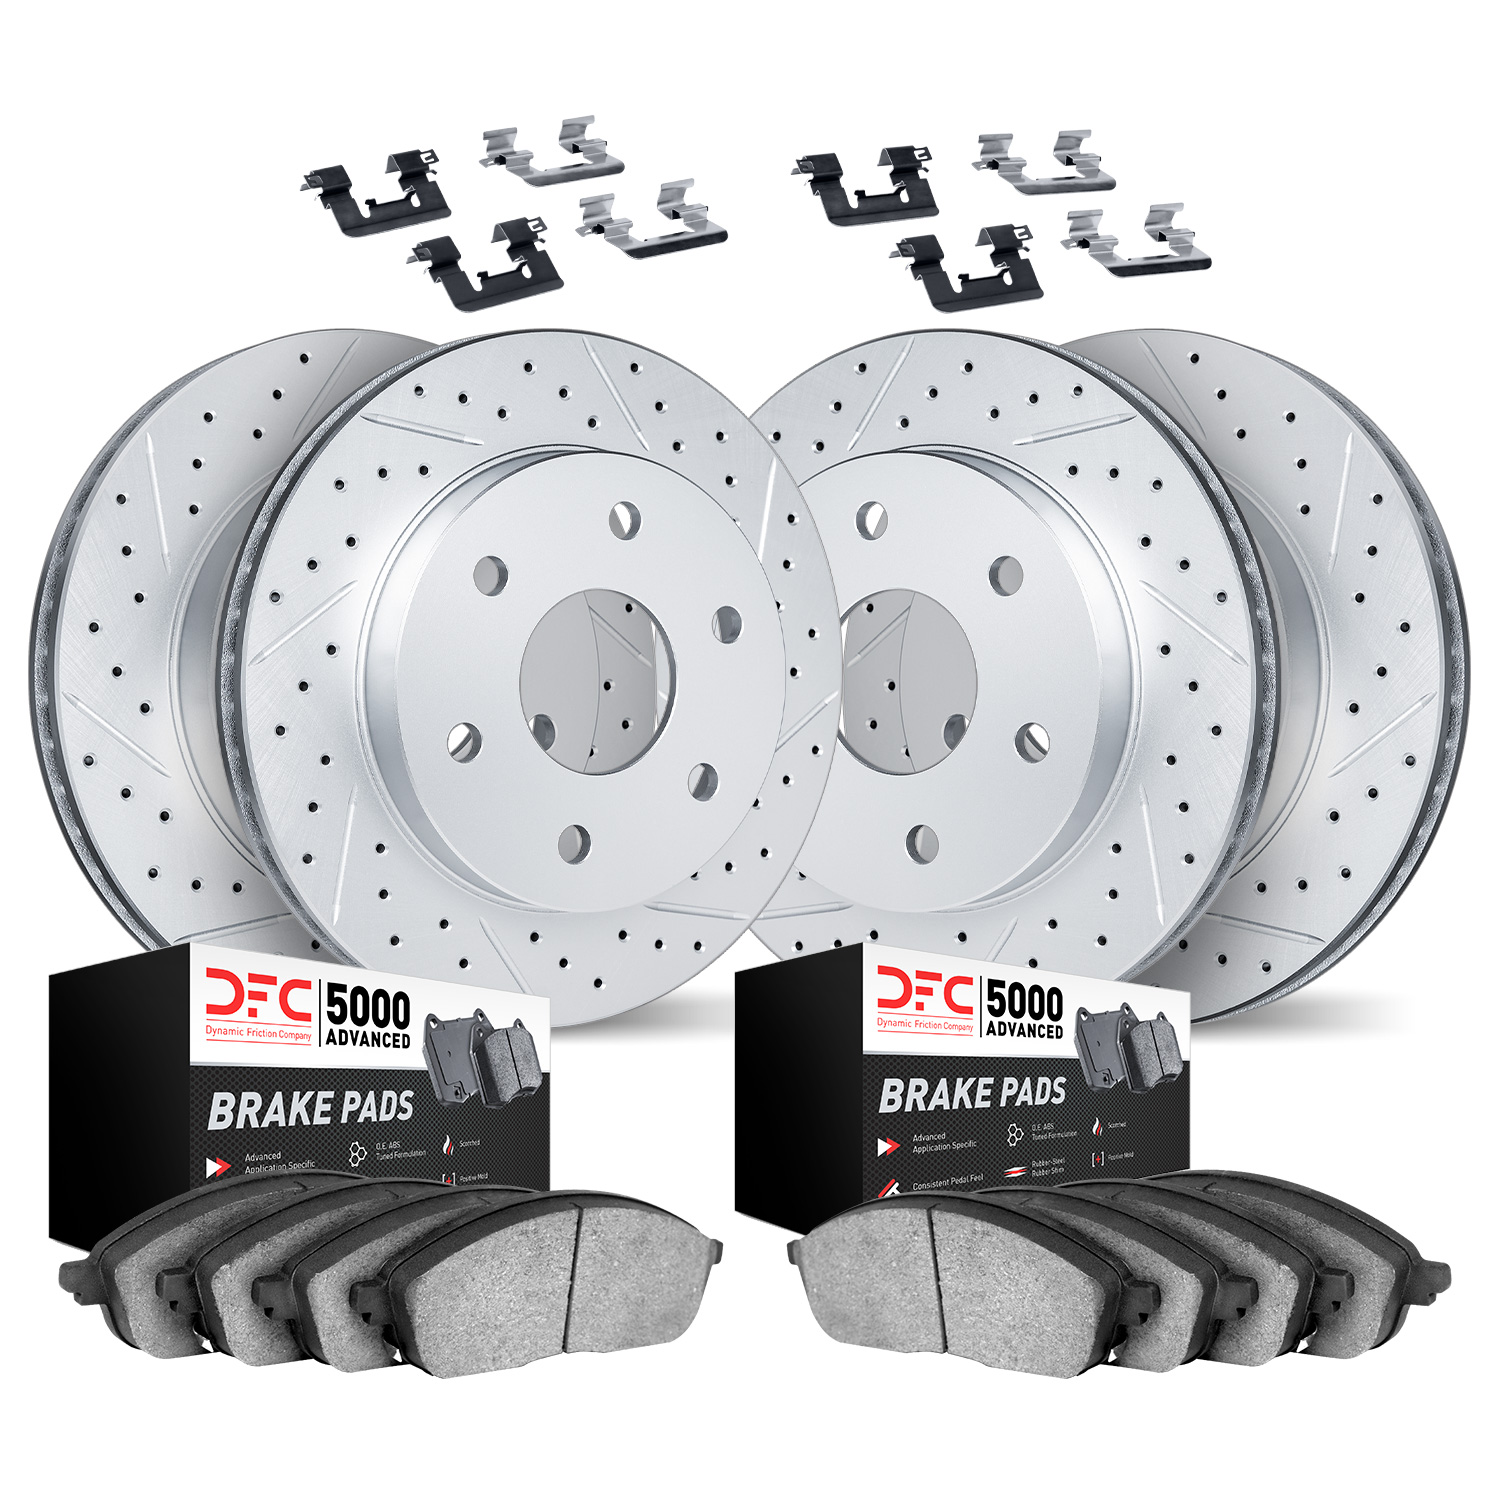 2514-47303 Geoperformance Drilled/Slotted Rotors w/5000 Advanced Brake Pads Kit & Hardware, 2006-2009 GM, Position: Front and Re